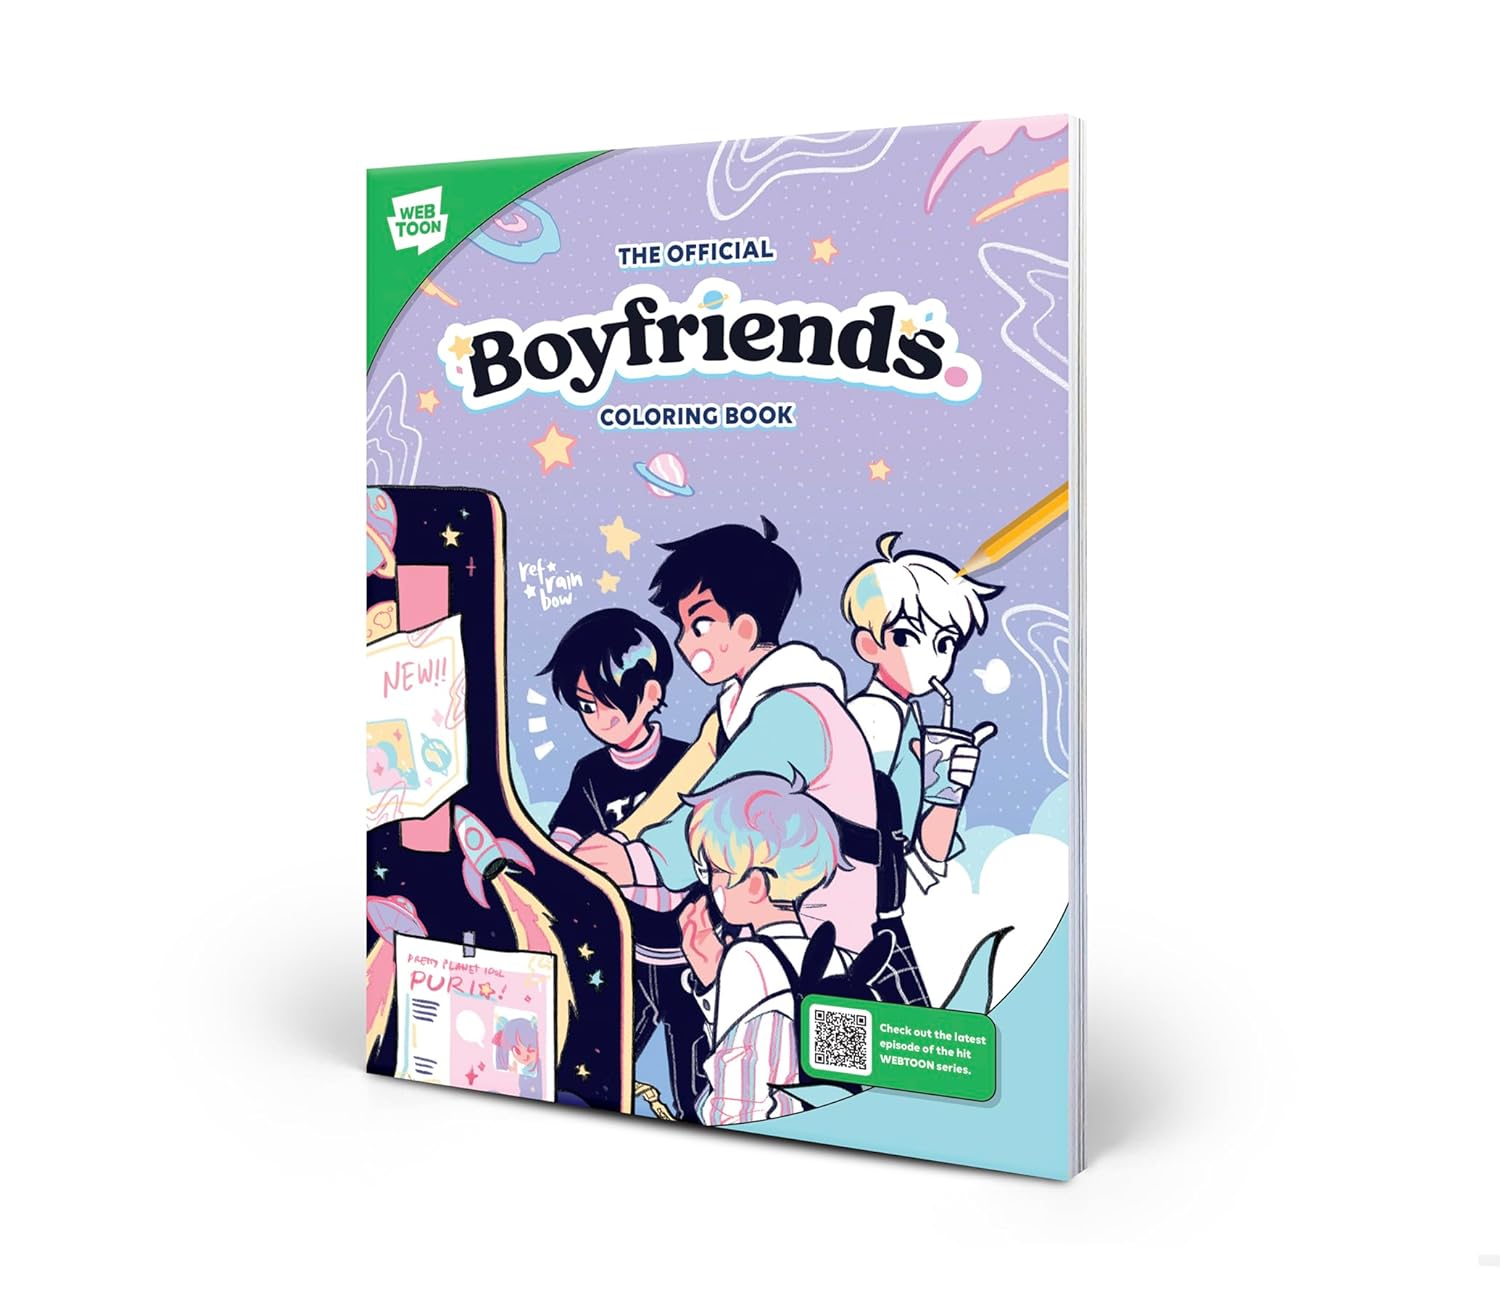 The Official Boyfriends. Coloring Book